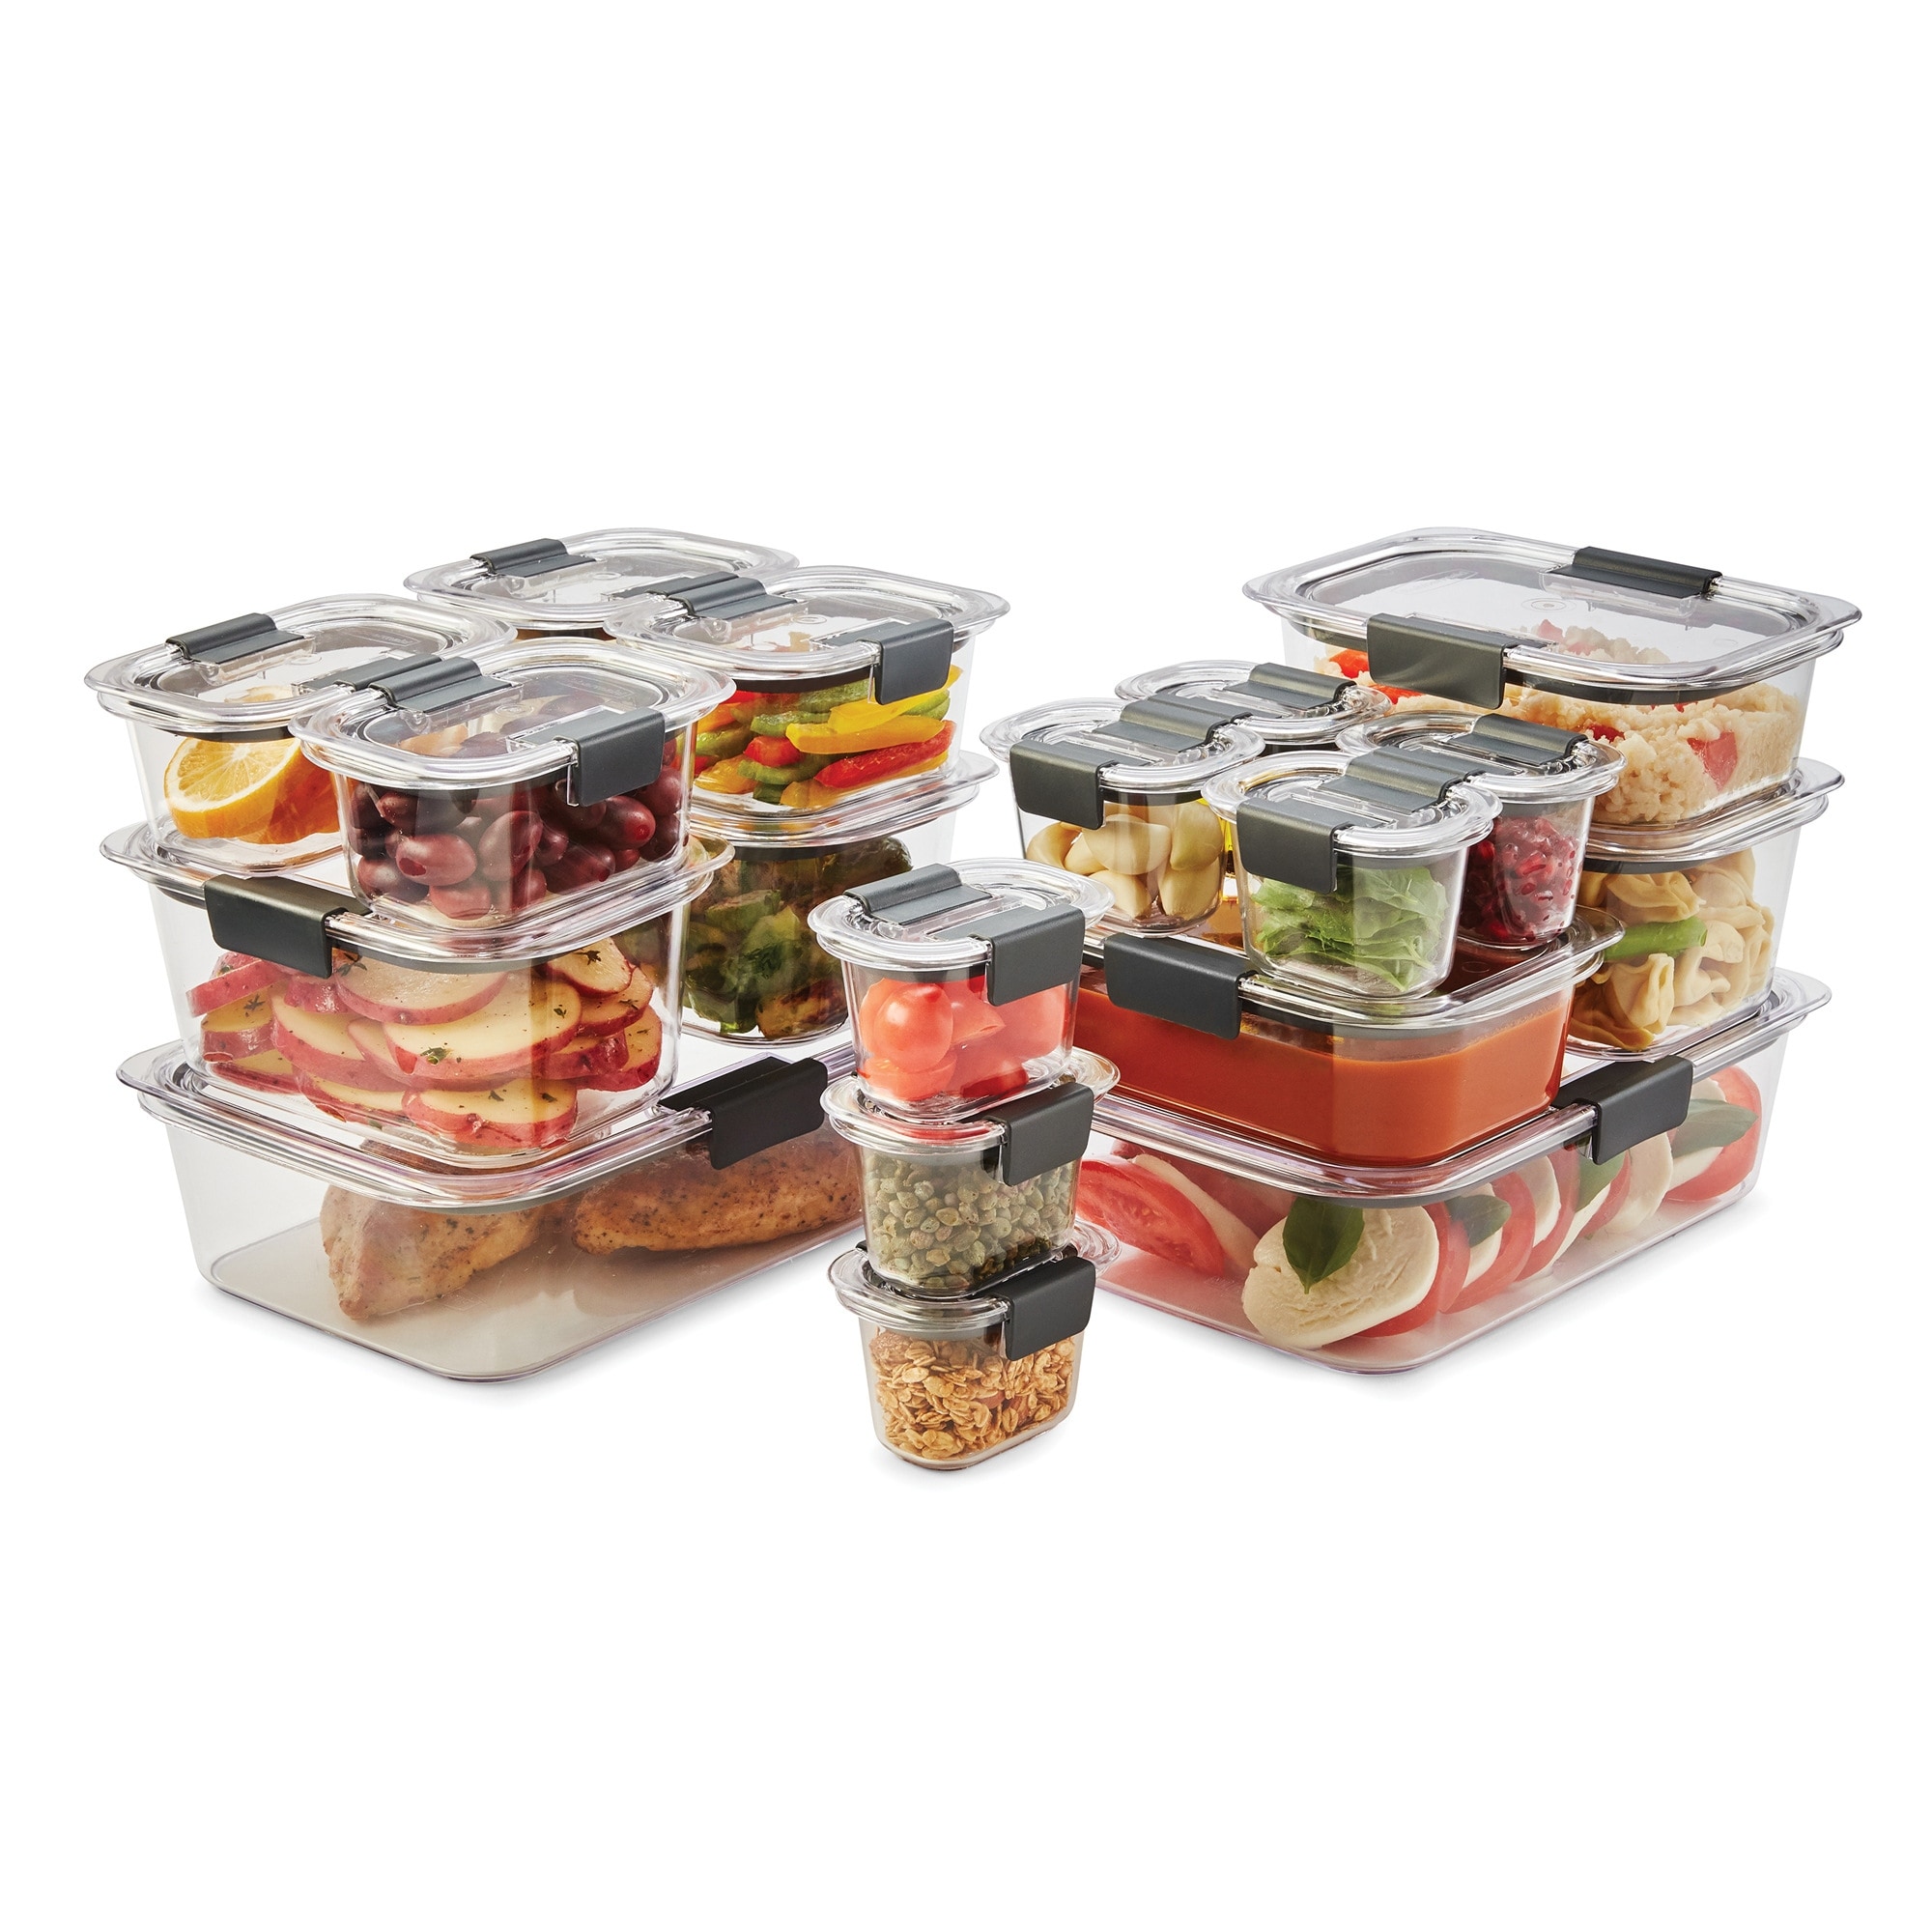 Rubbermaid Brilliance 1.3 Cup Stain-Proof Food Storage Container, Set of 2  NEW